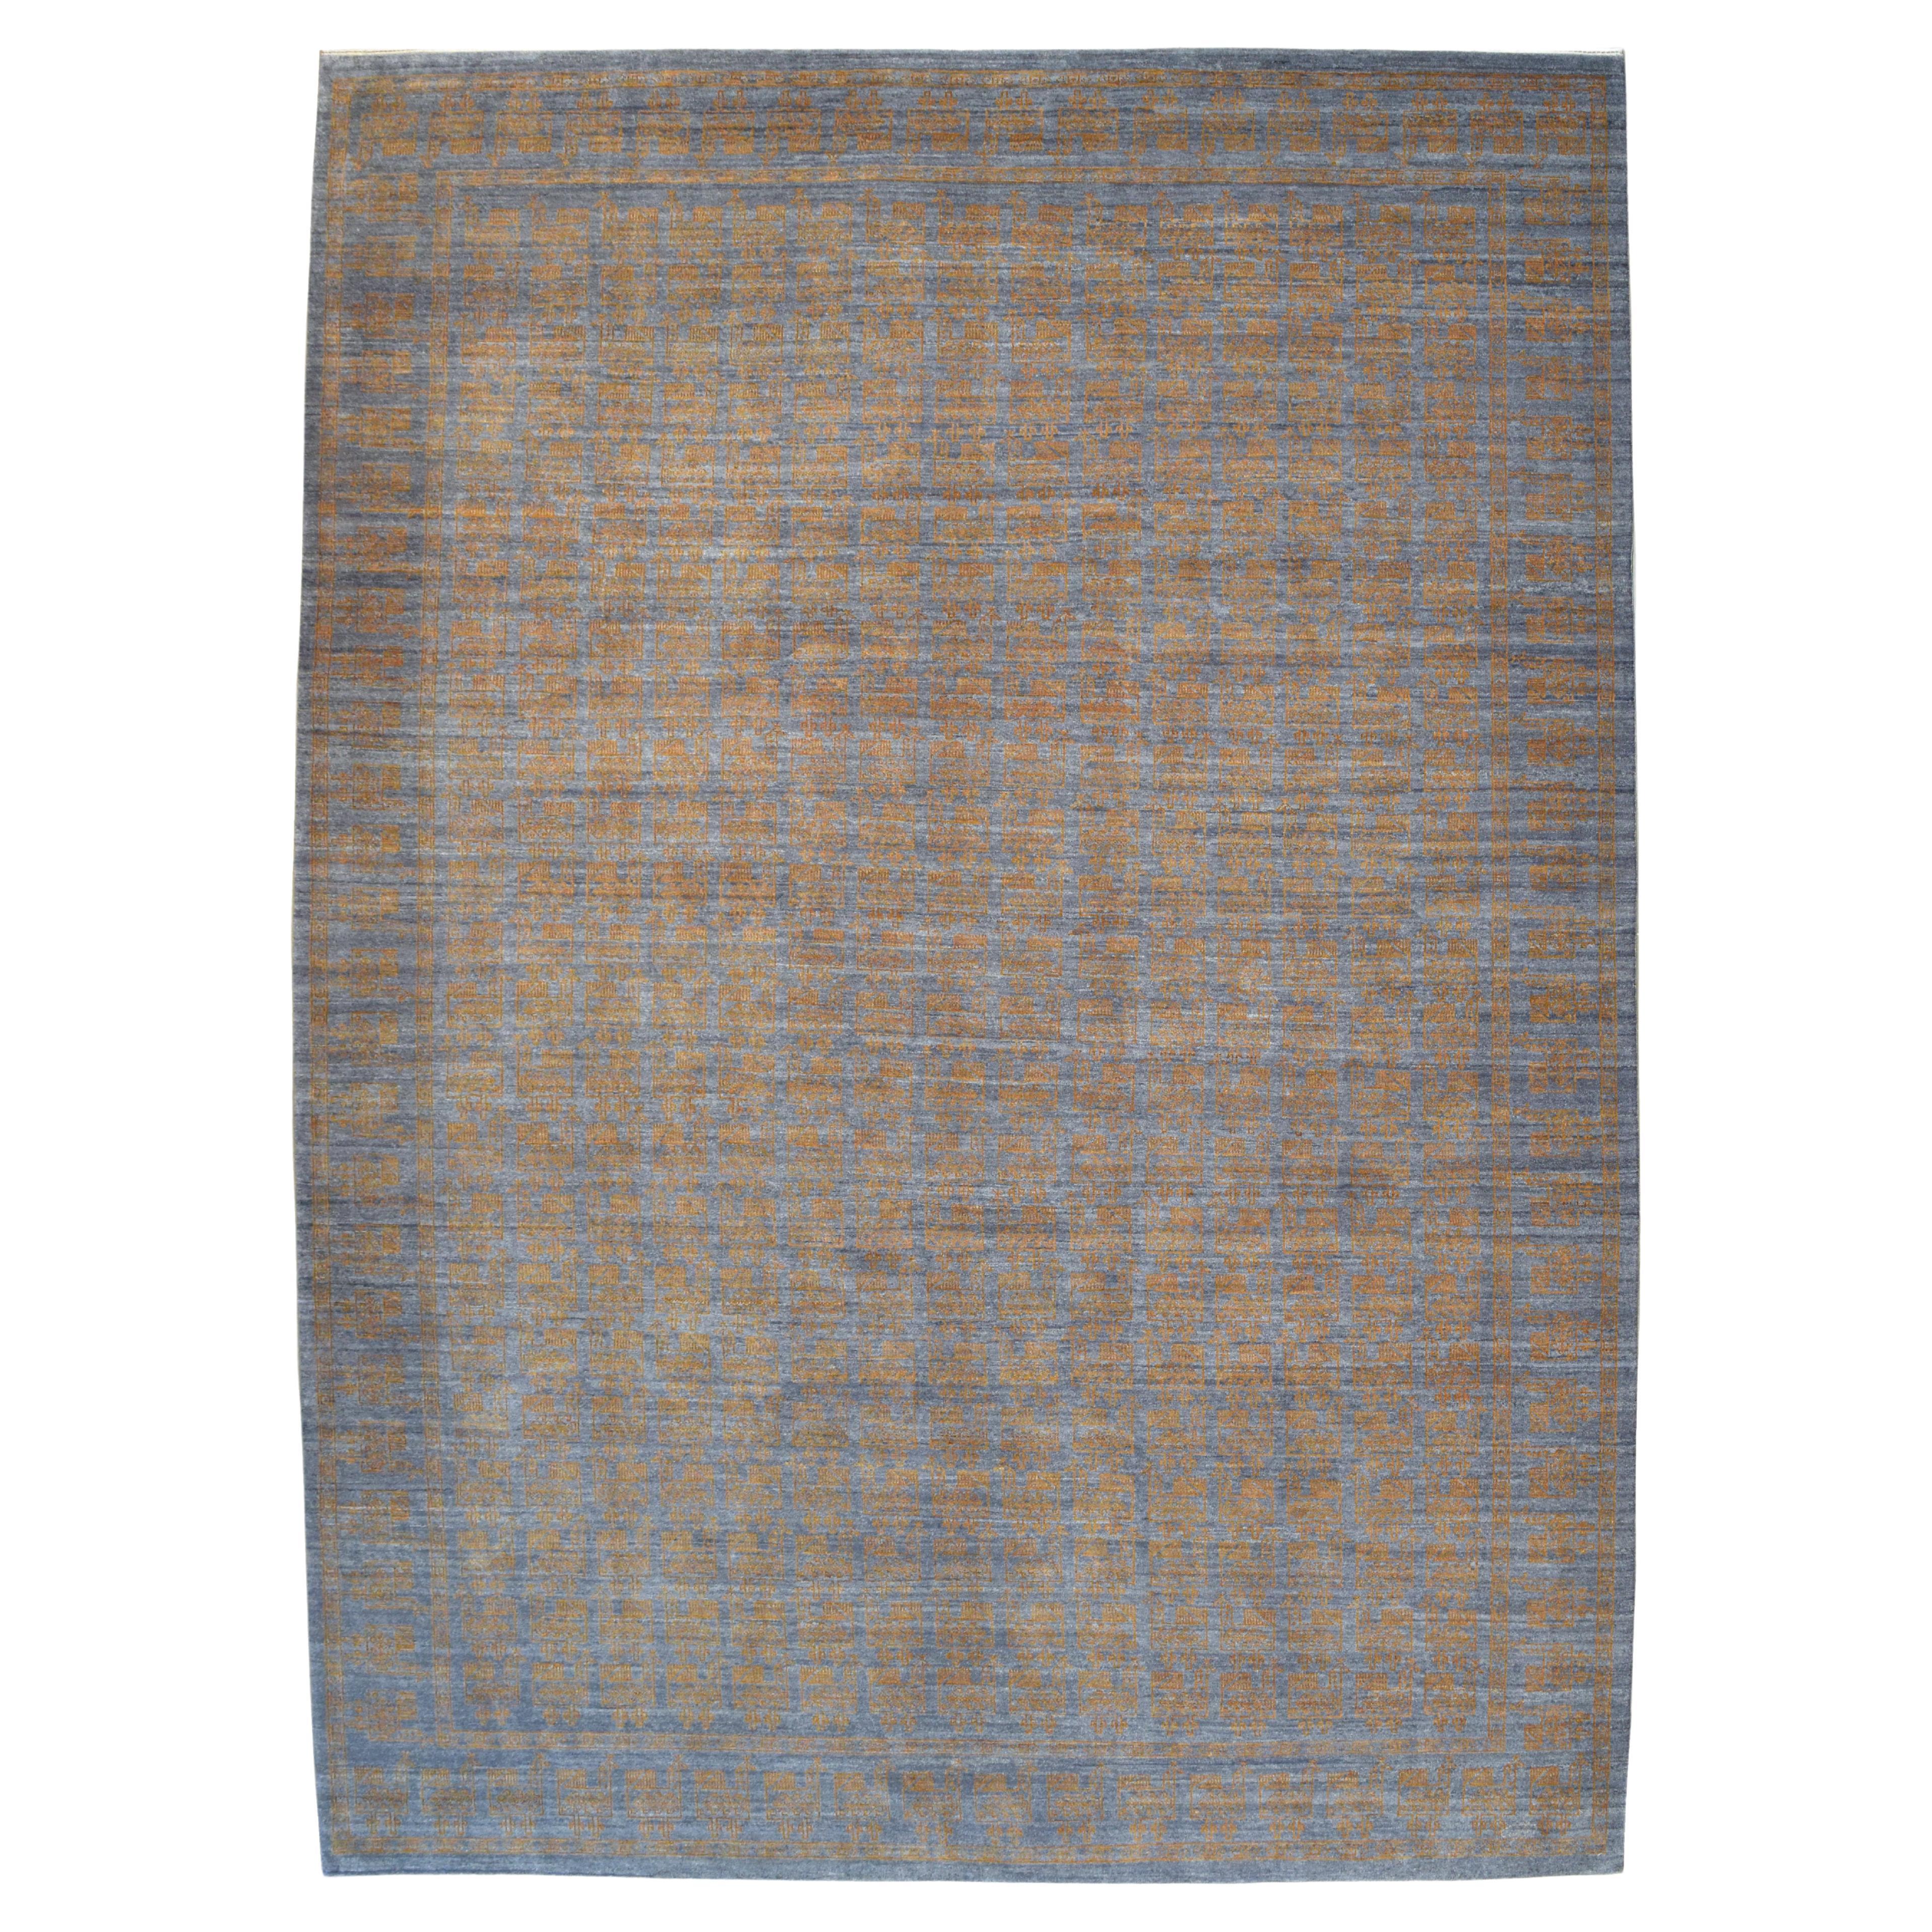 Orley Shabahang, Orange and Gray Modern Peacock Carpet, Wool, 9' x 12' For Sale